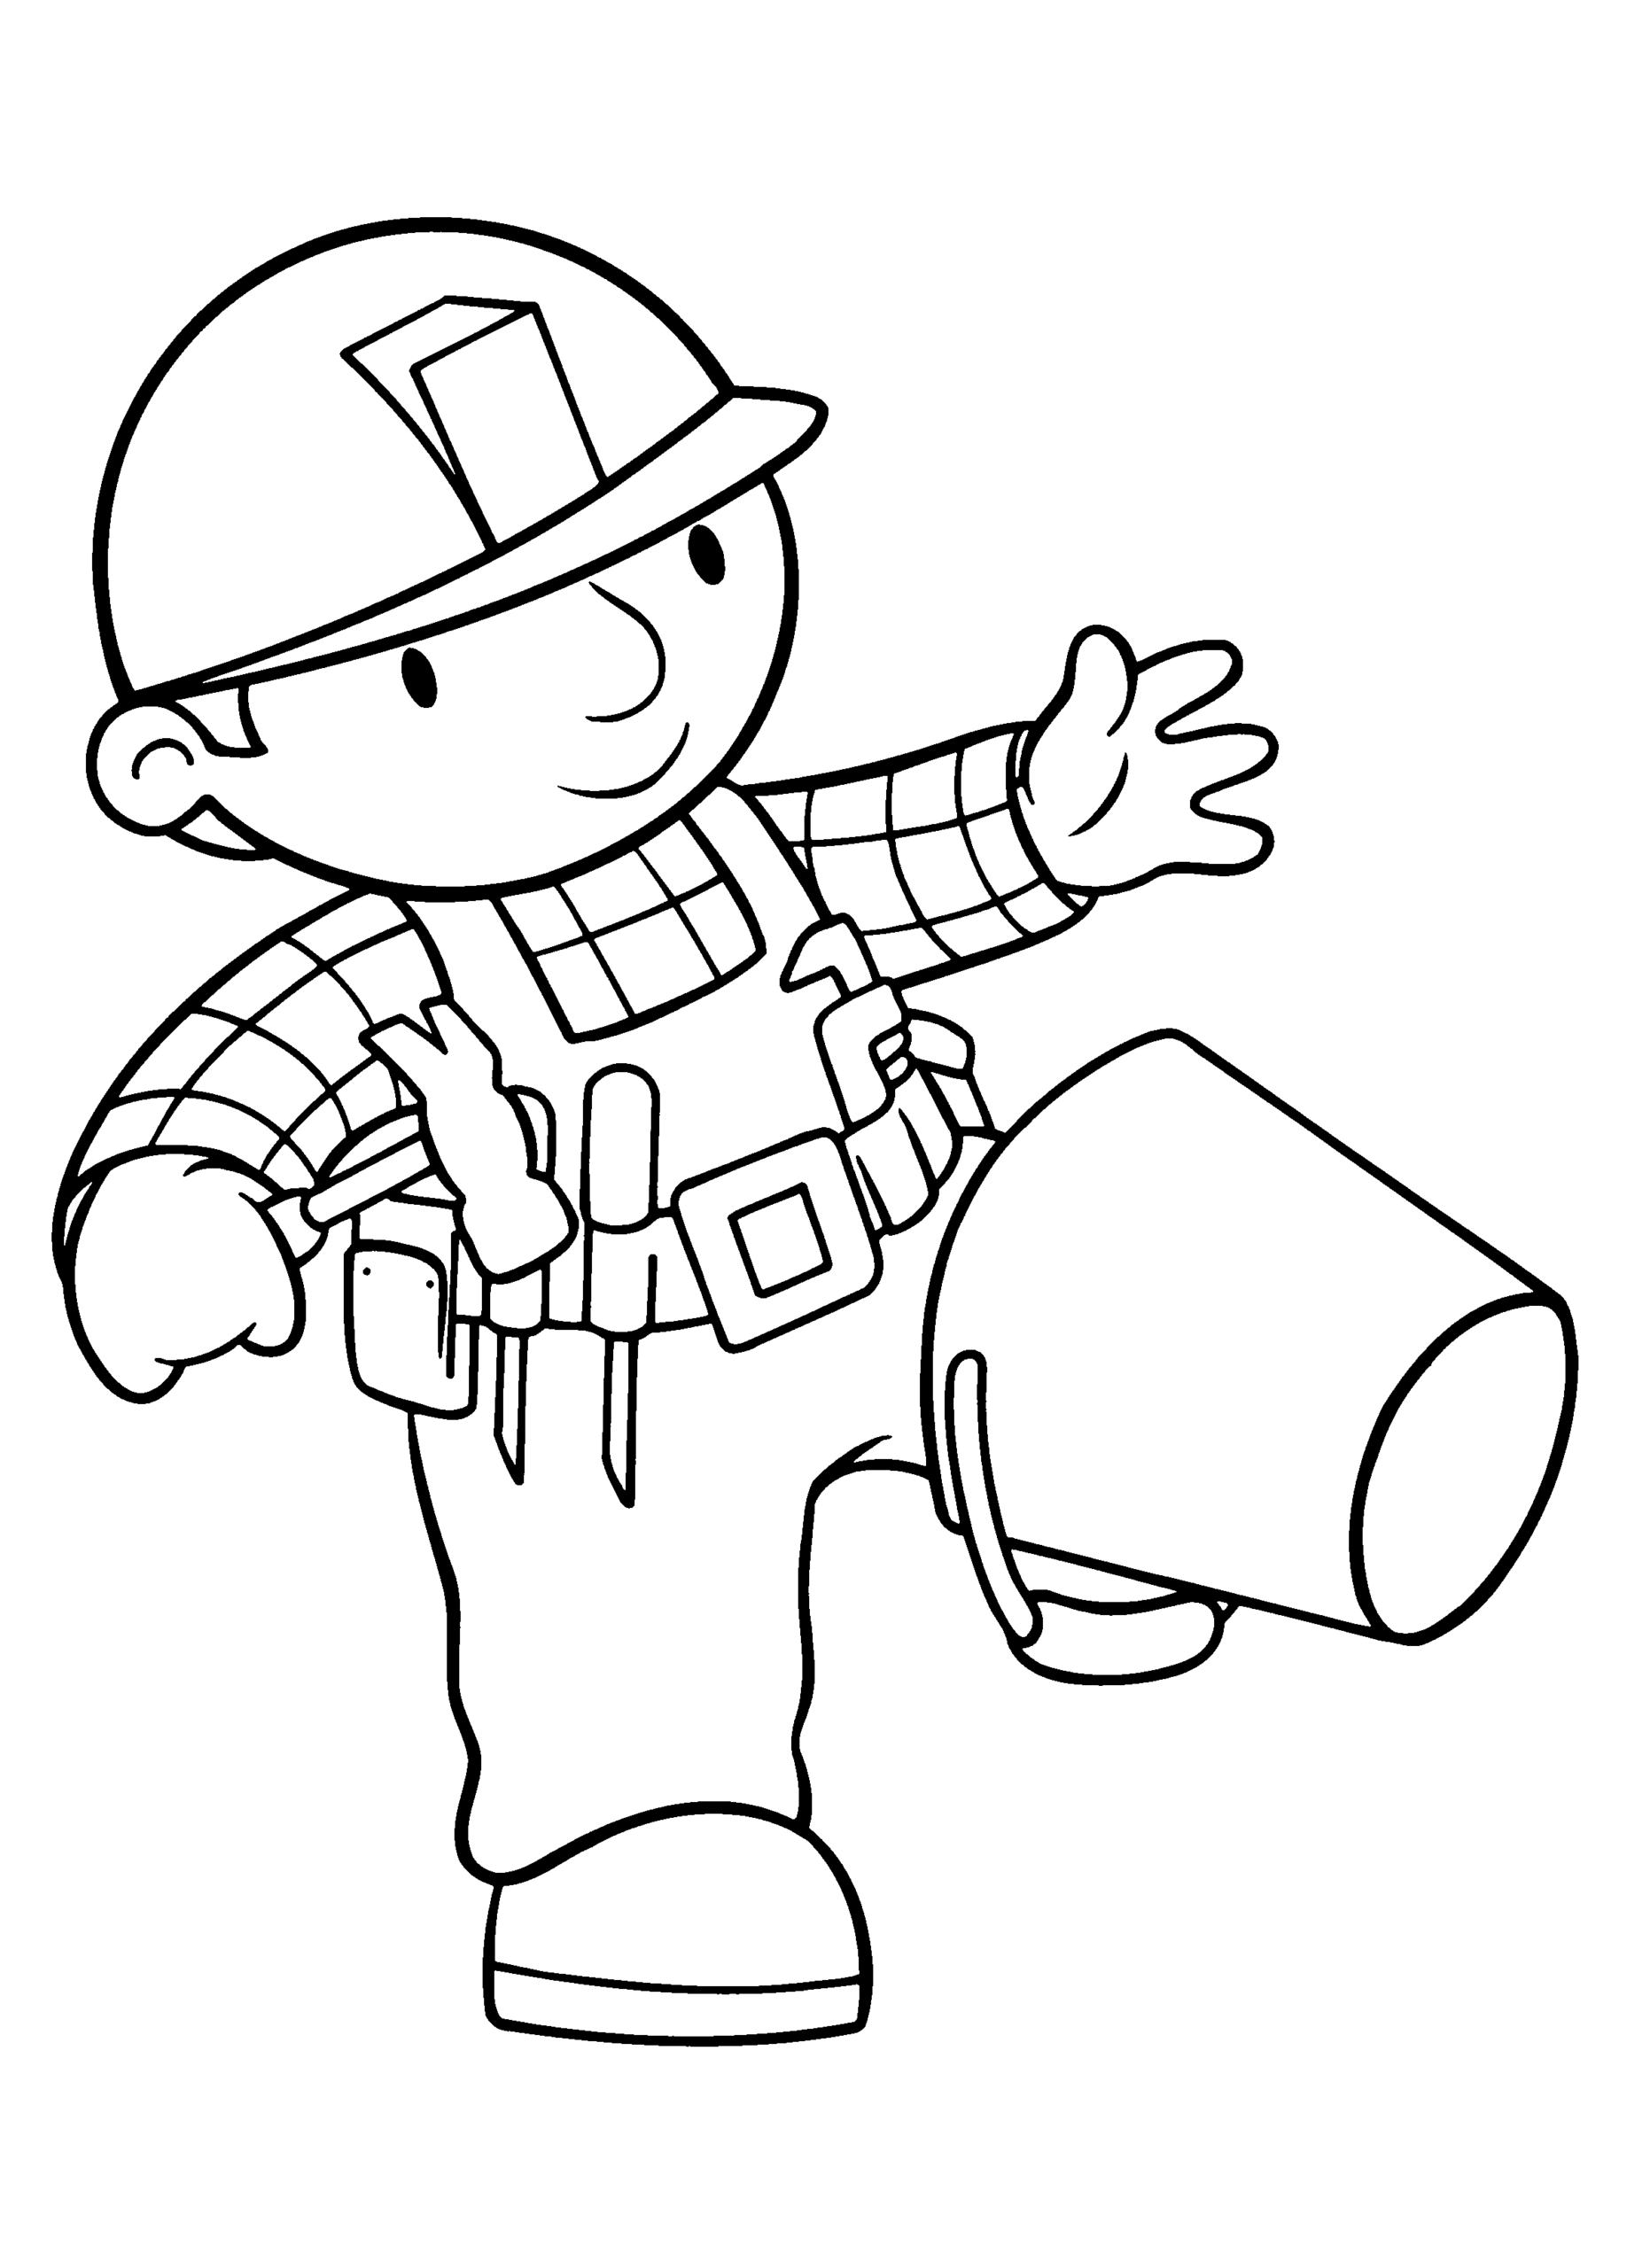 Bob the Builder Coloring Pages TV Film bob the builder 32 Printable 2020 01051 Coloring4free